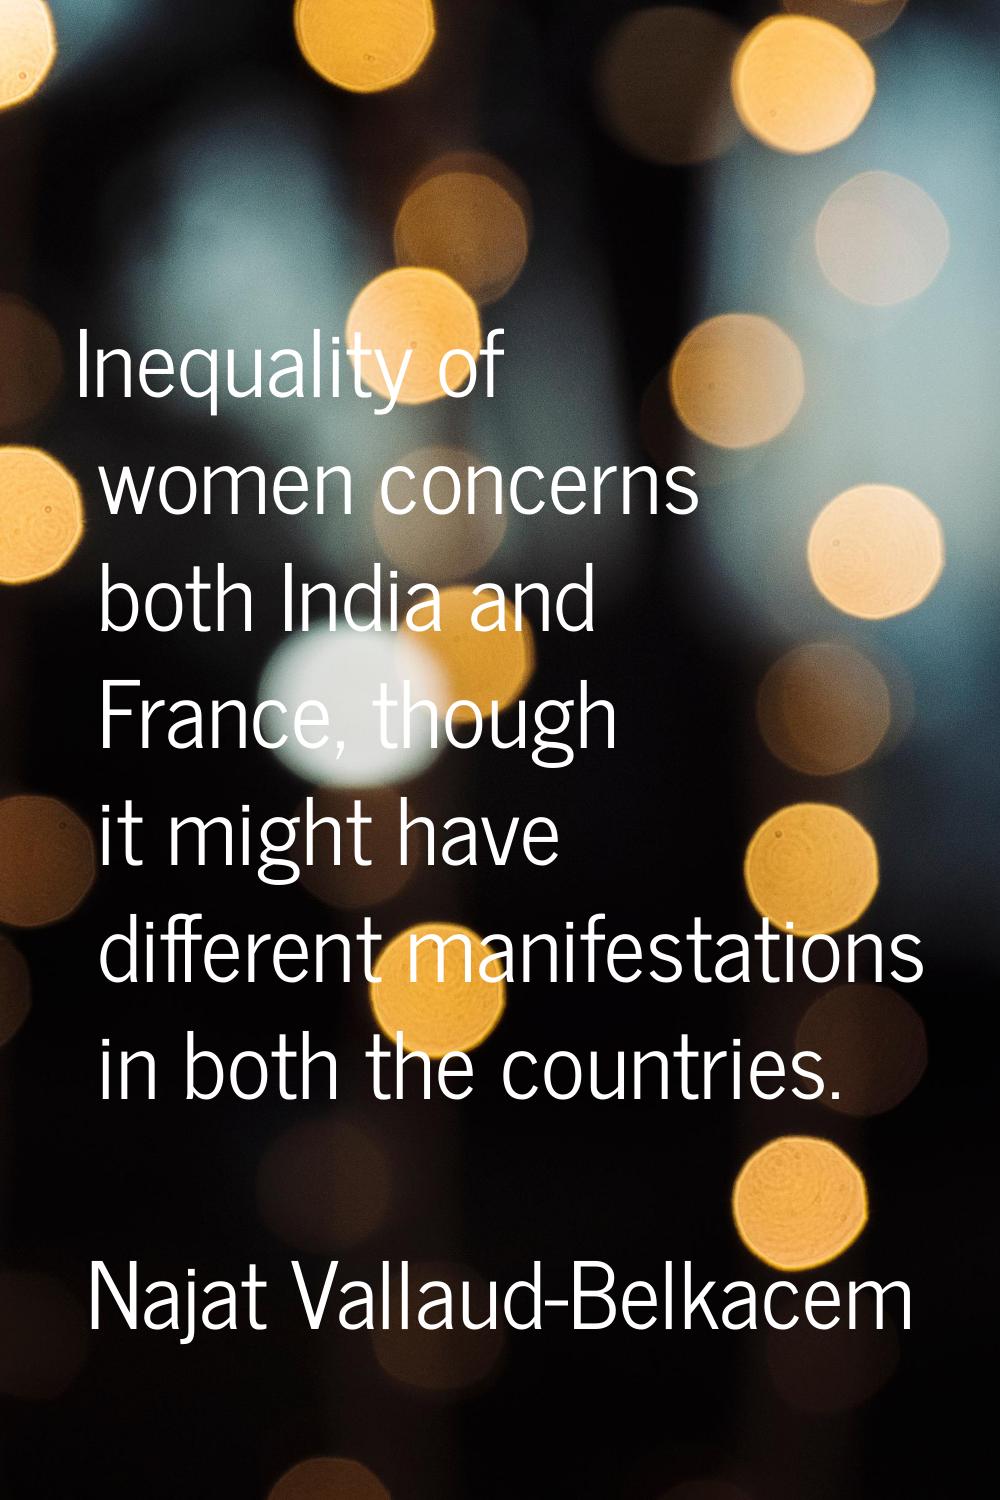 Inequality of women concerns both India and France, though it might have different manifestations i